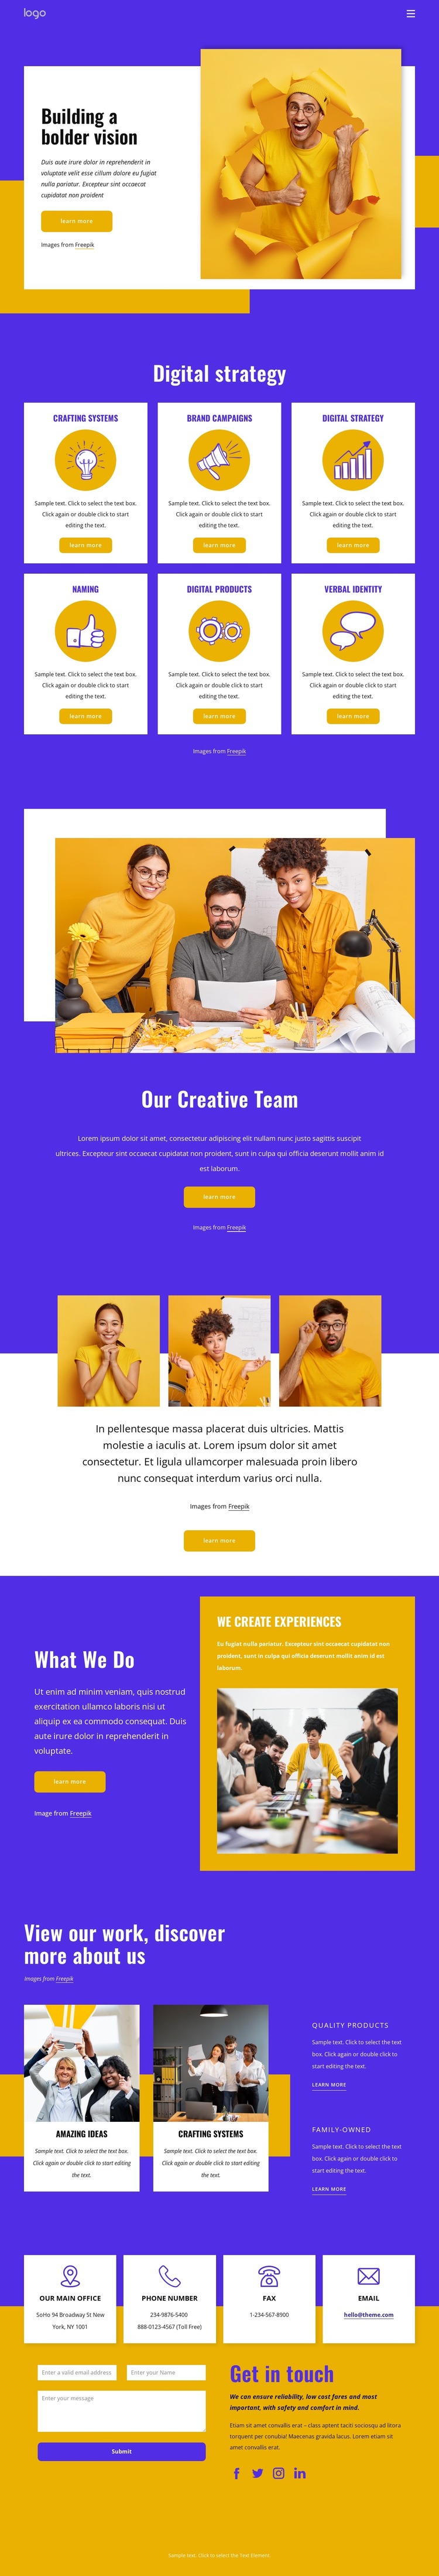 UX design and branding agency HTML5 Template